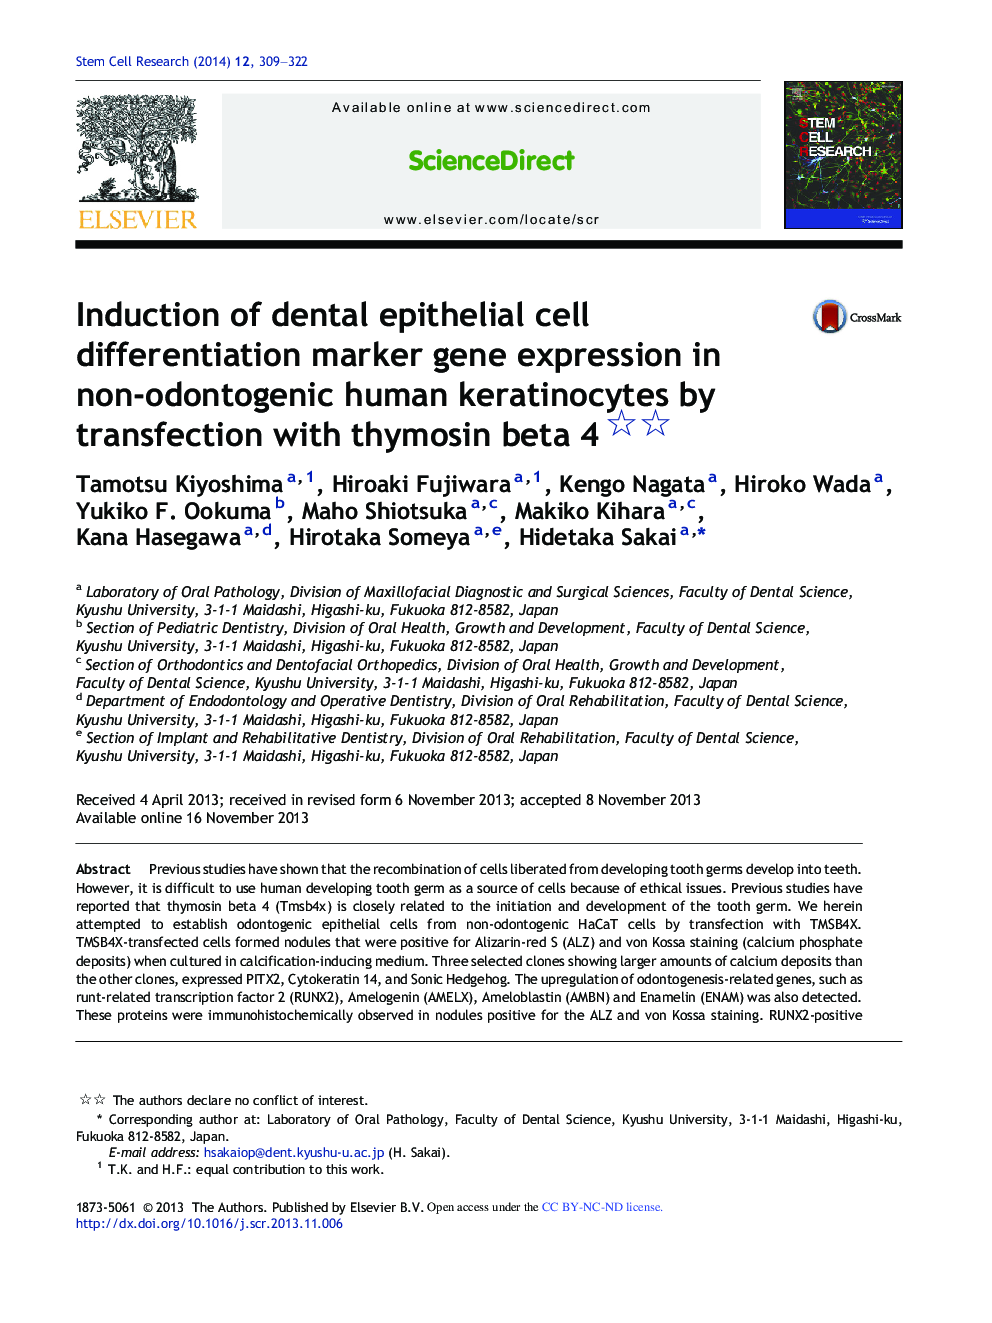 Induction of dental epithelial cell differentiation marker gene expression in non-odontogenic human keratinocytes by transfection with thymosin beta 4 